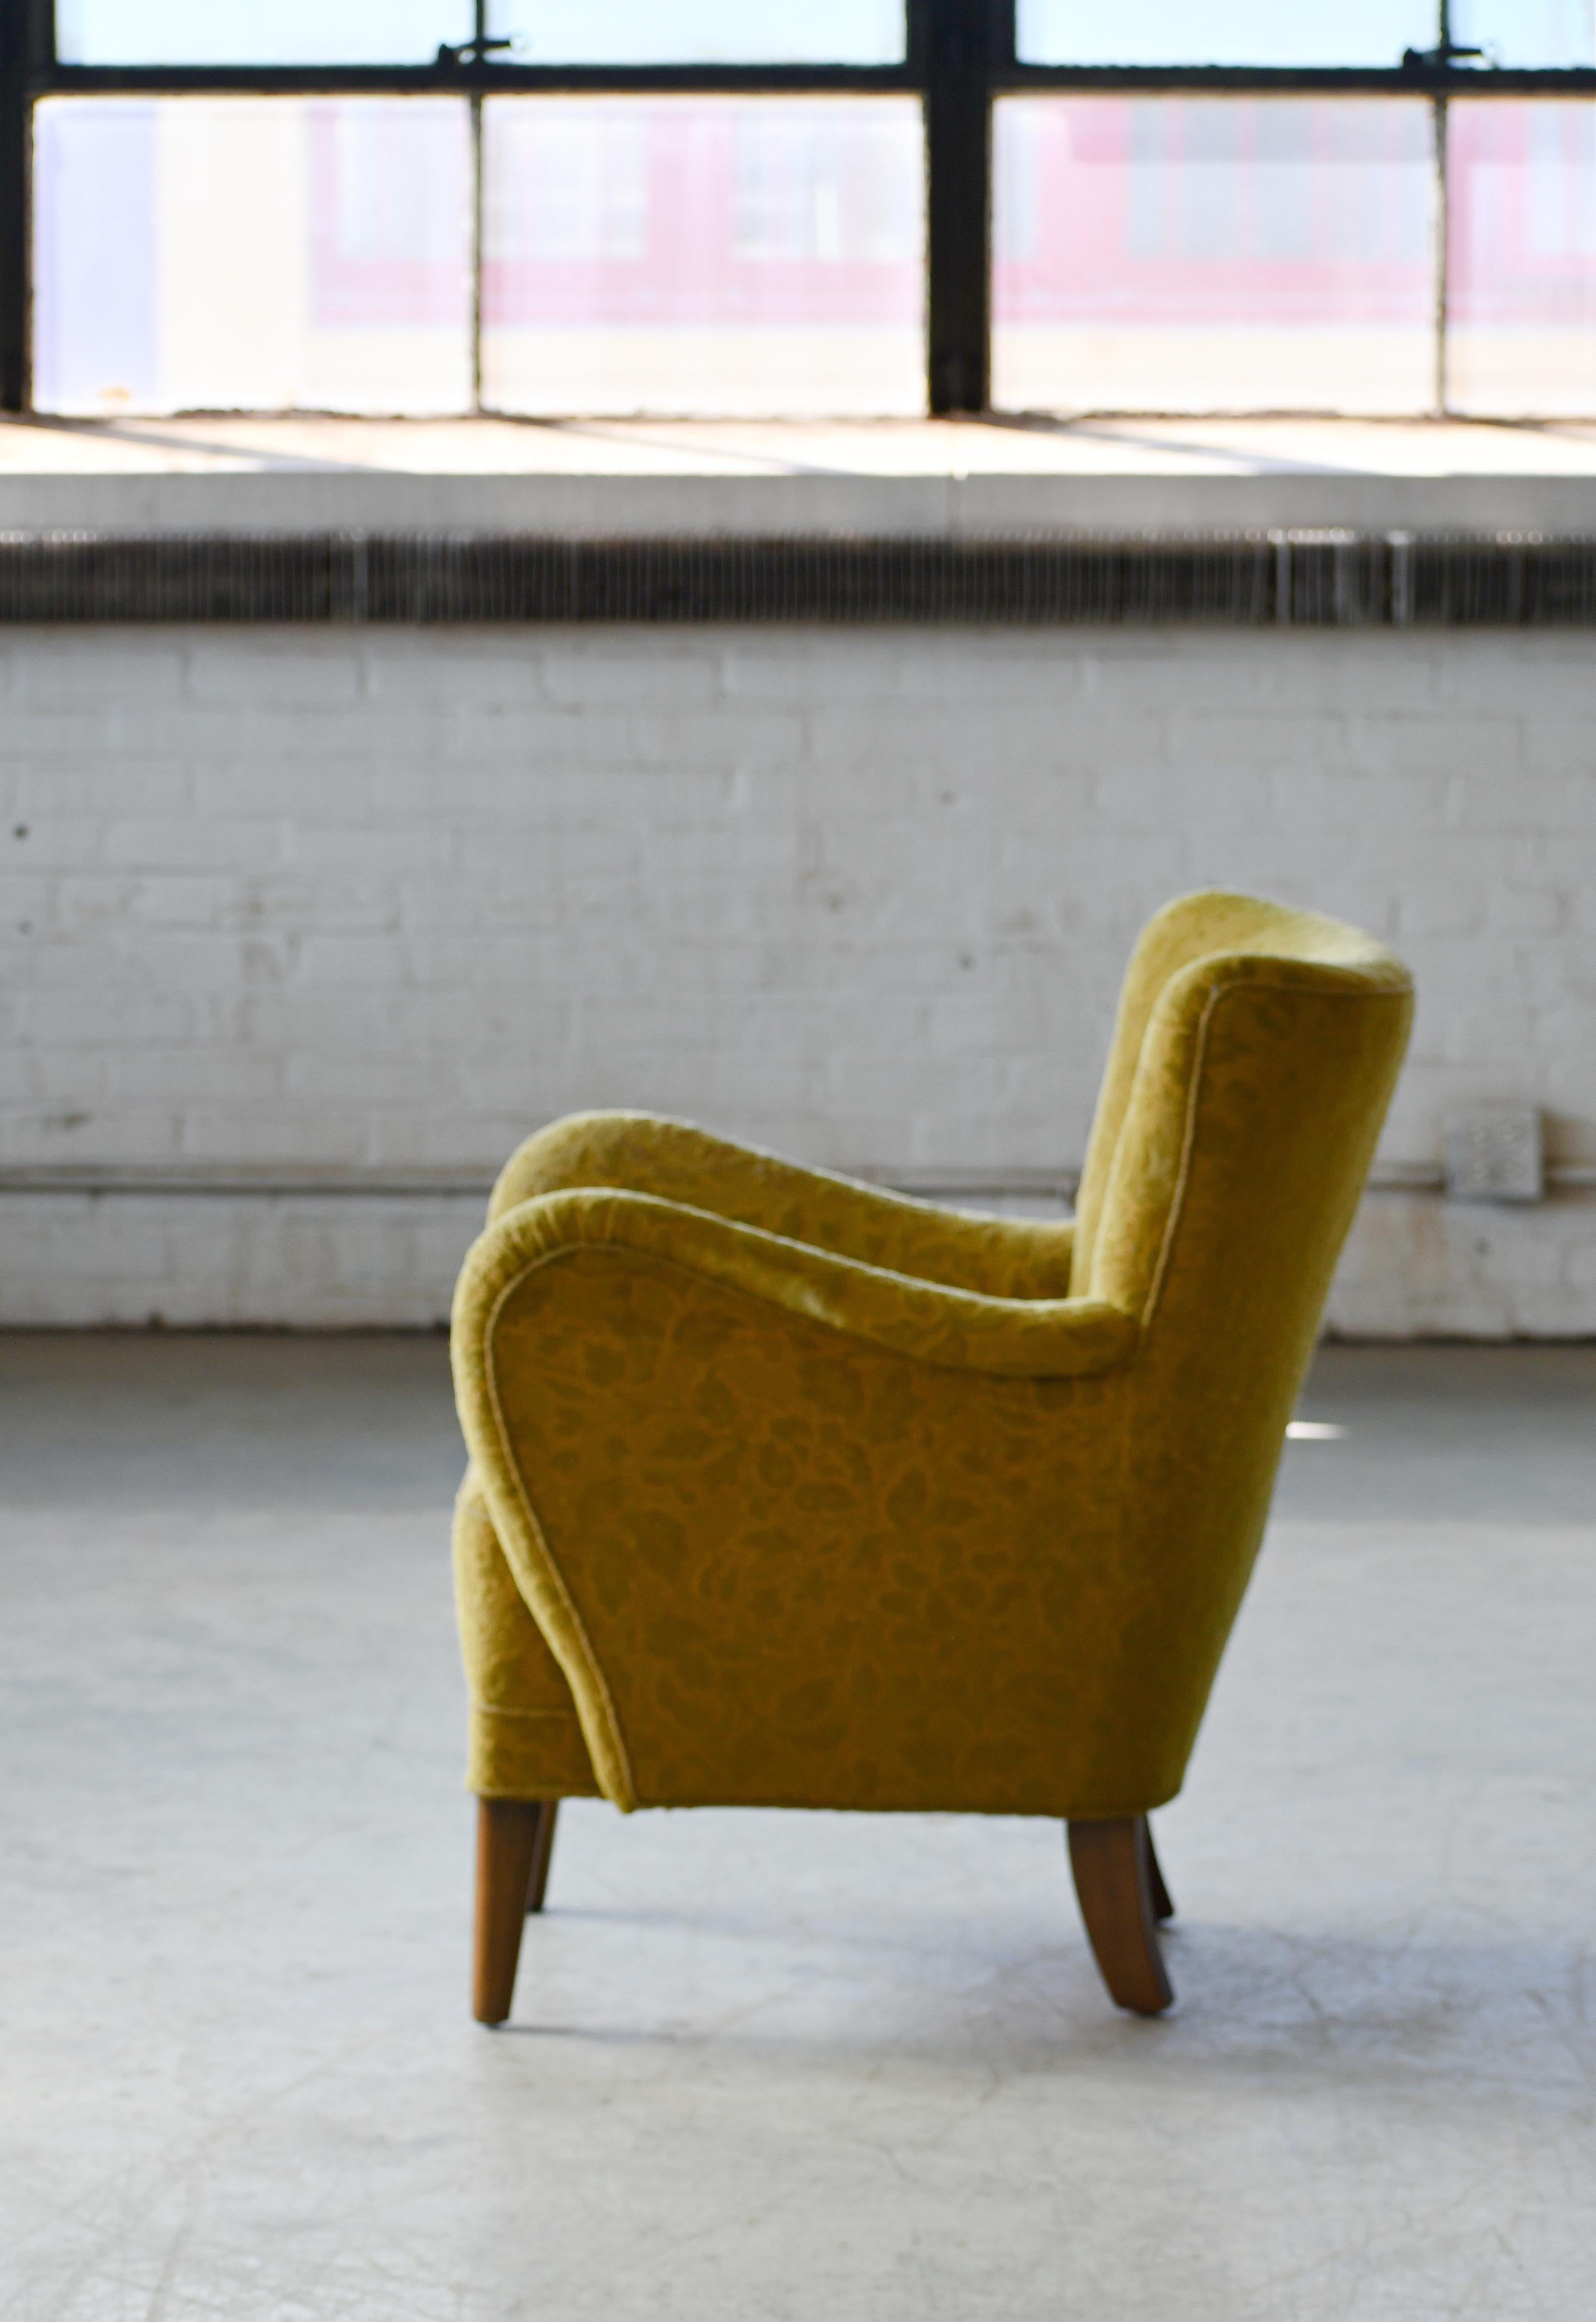 Danish Midcentury 1940s Flemming Lassen Style Low Lounge Chair For Sale 2